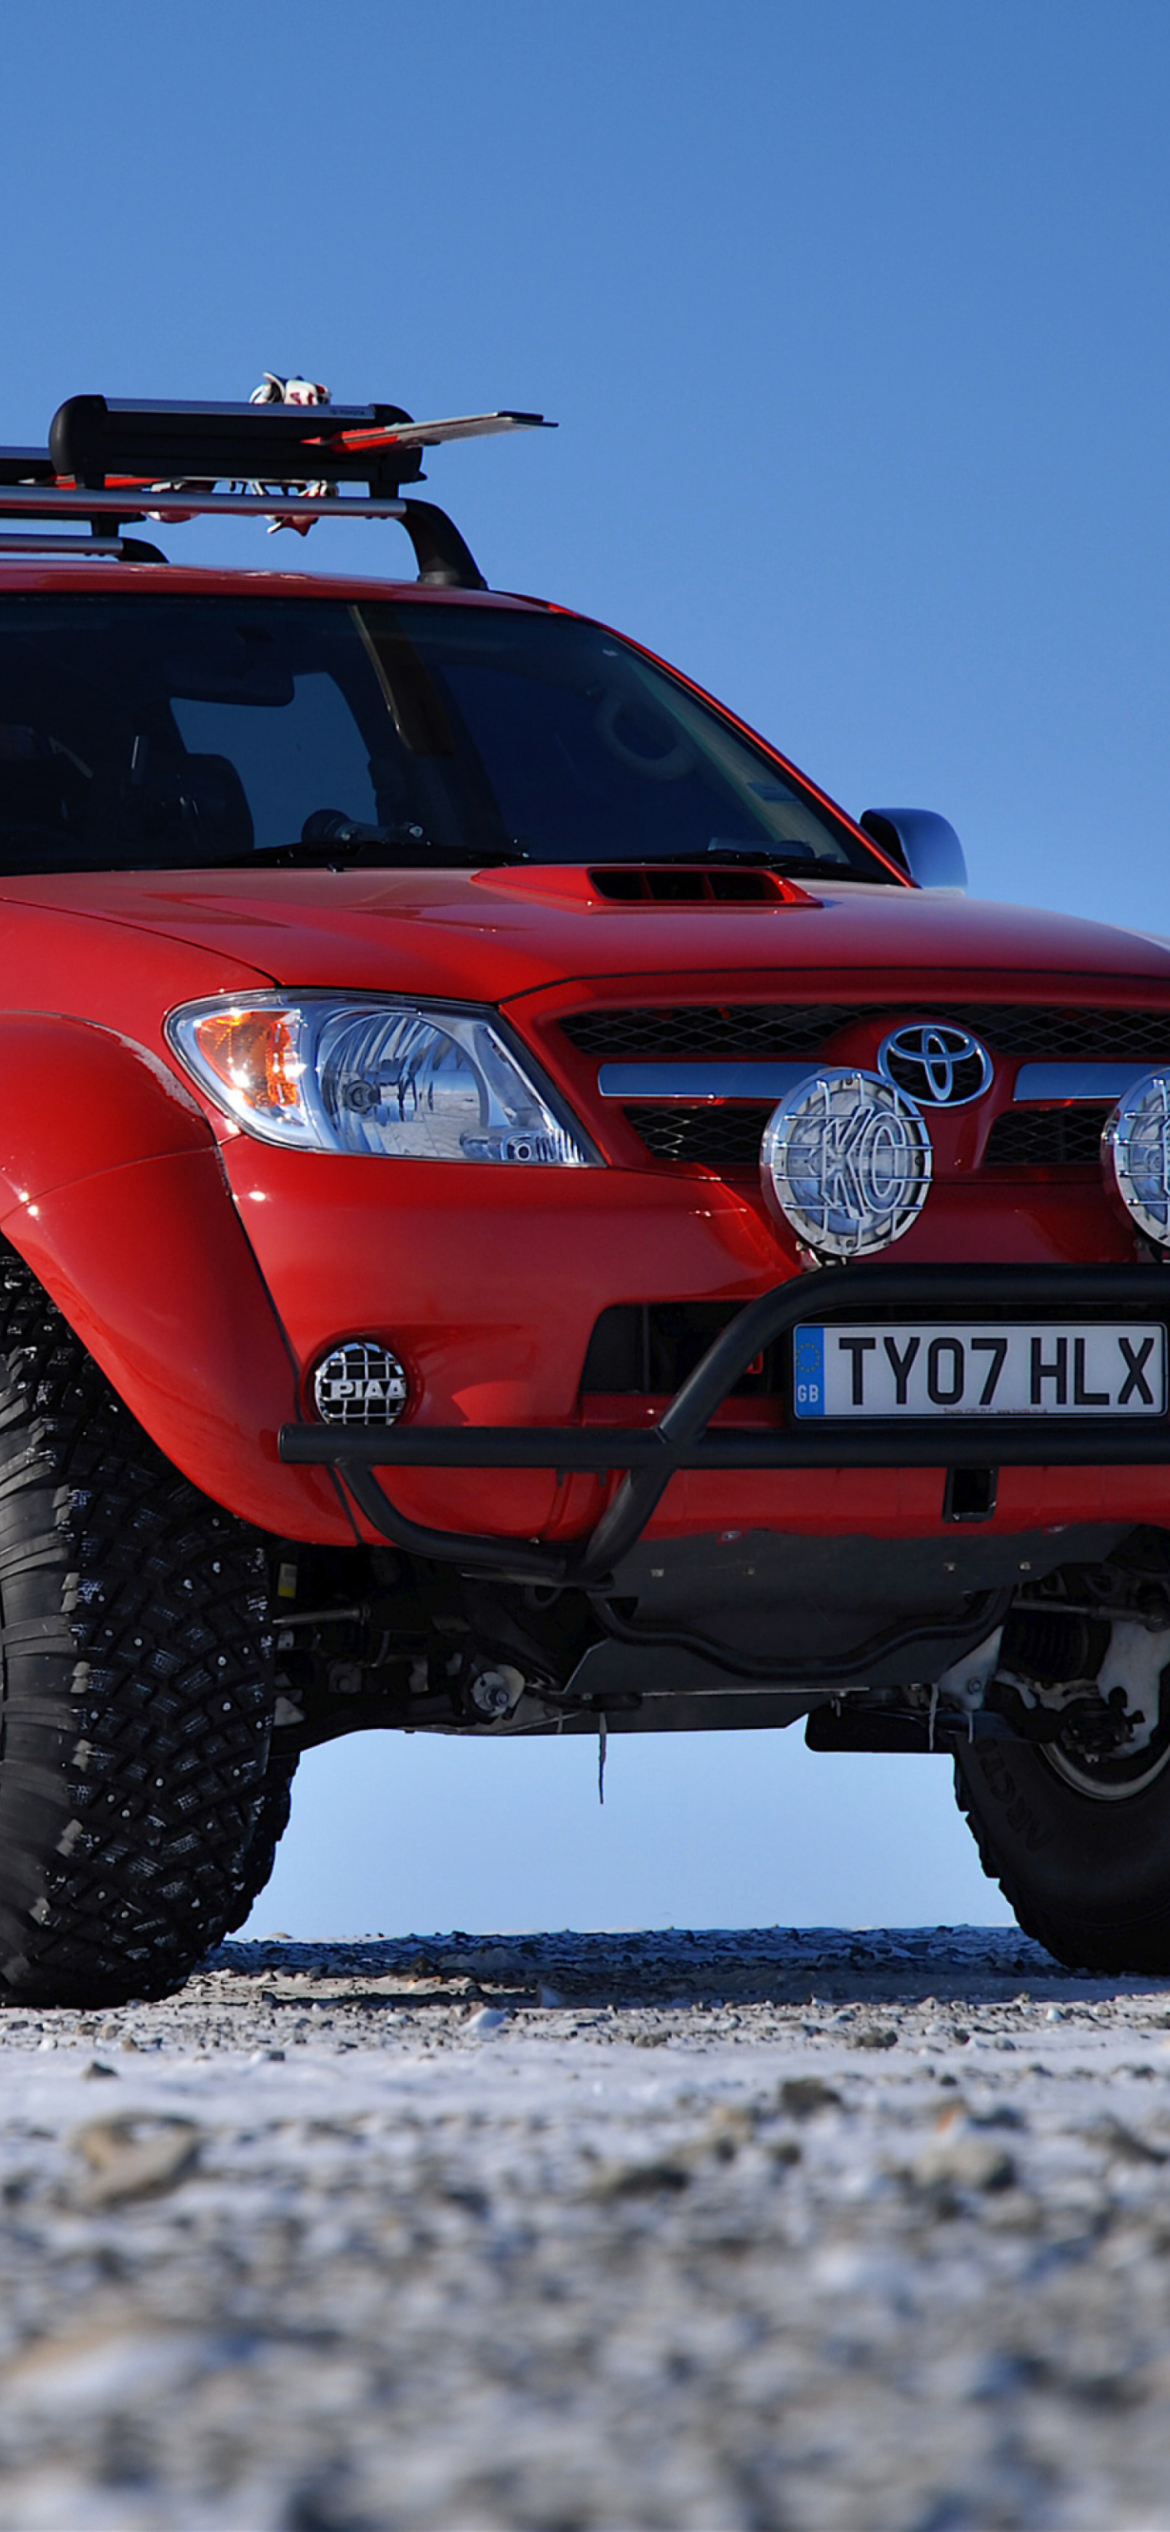 Toyota Hilux from Top Gear wallpaper 1170x2532